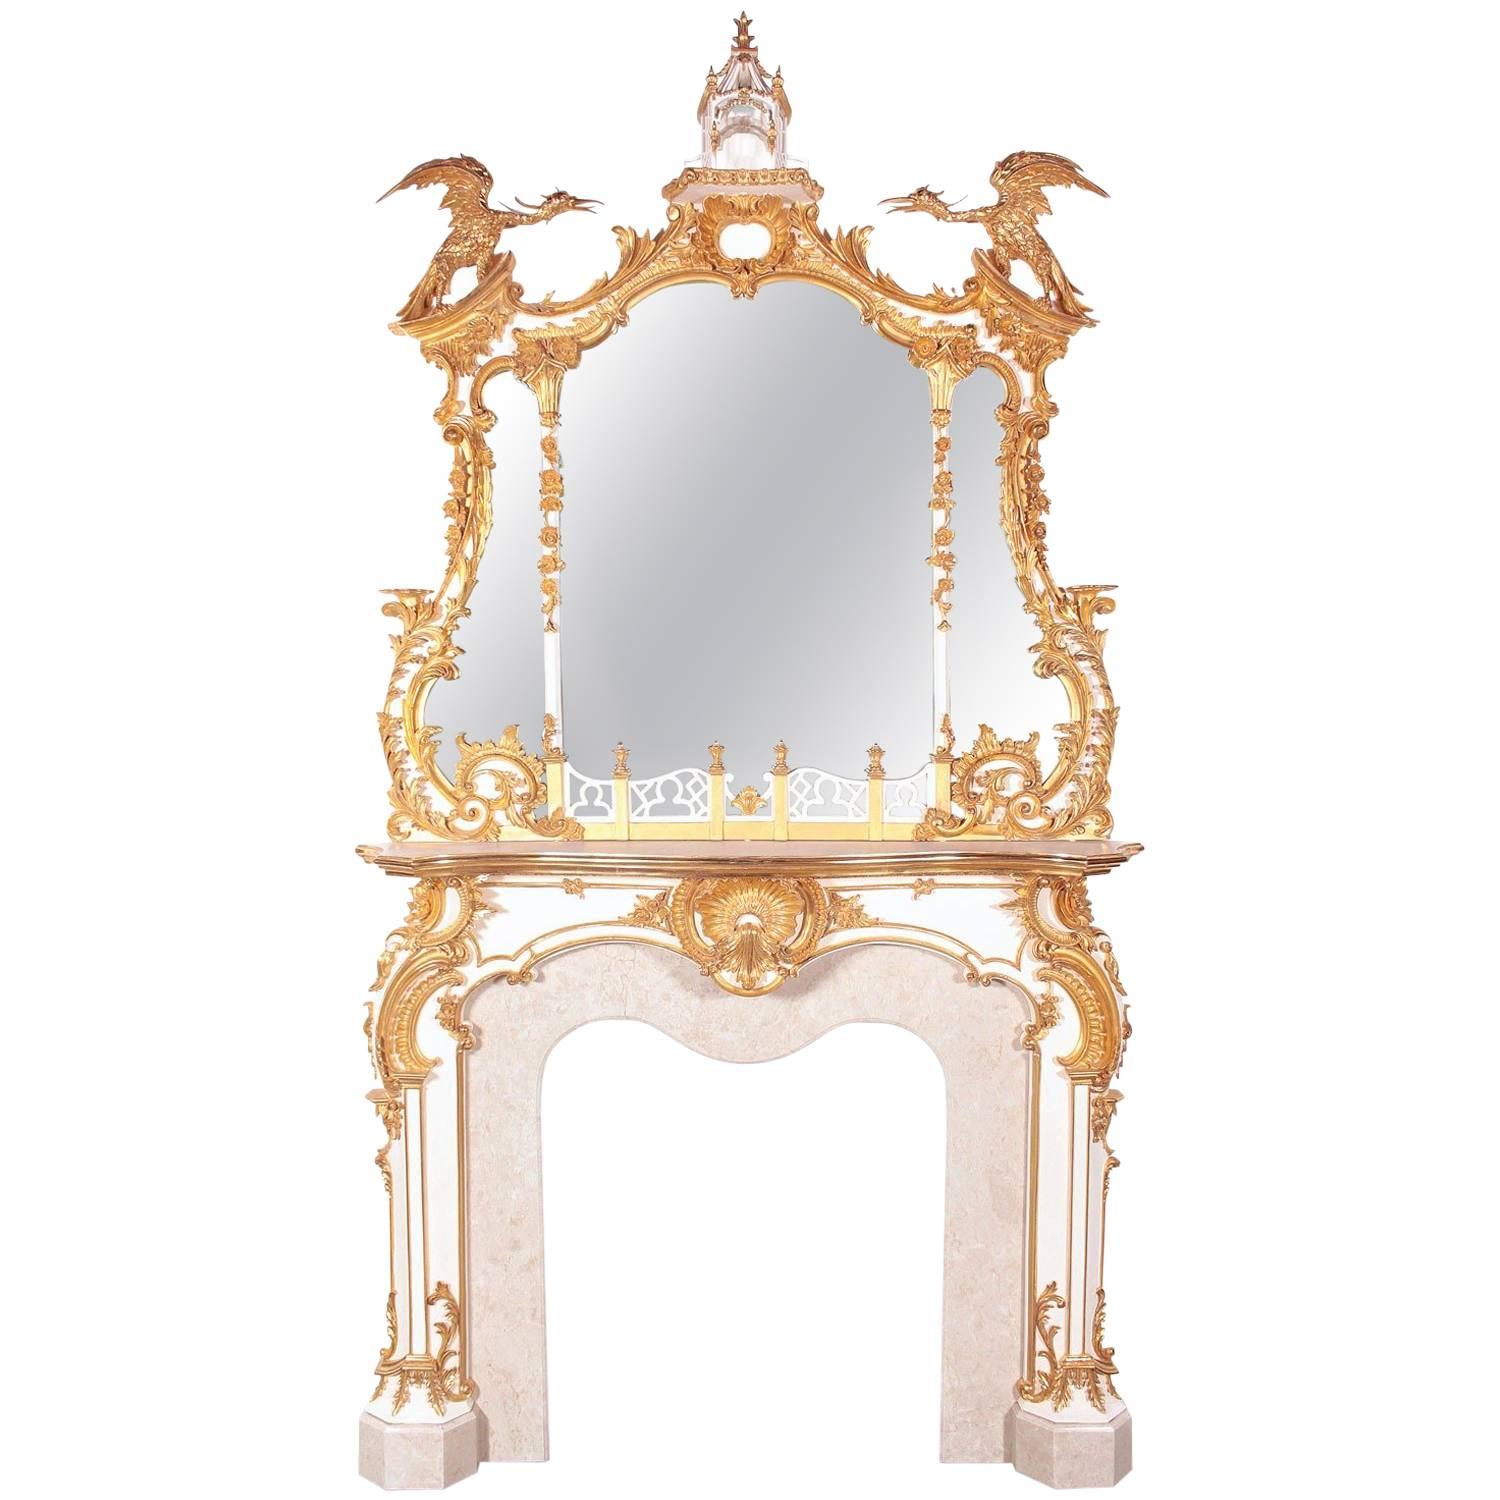 Chippendale 18th Century Style Fireplace Surround and Mirror For Sale